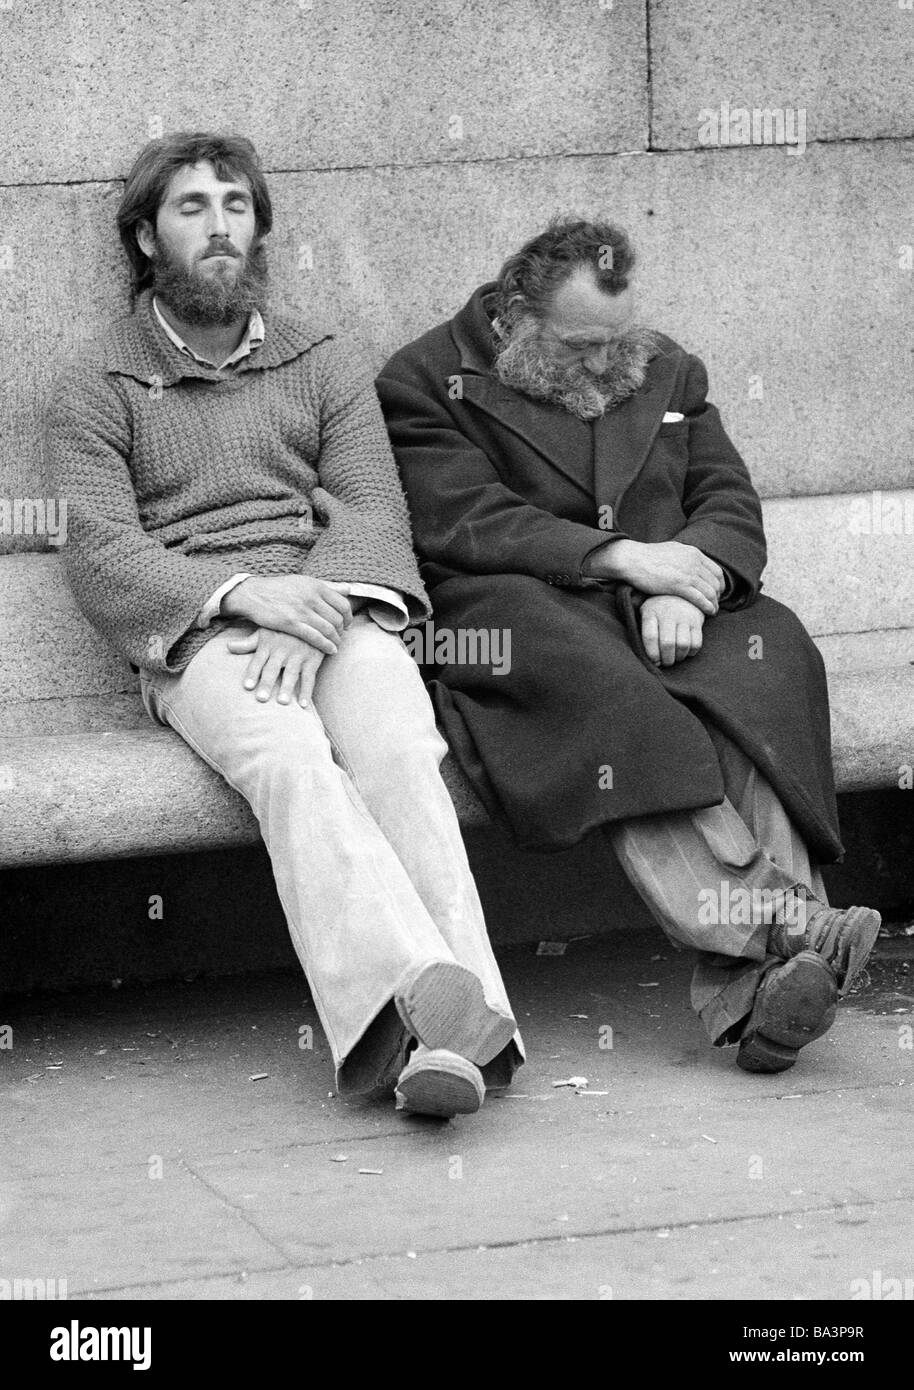 Seventies, black and white photo, people, two homeless men side by side on a bench, sleeping, depressed, aged 25 to 35 years, aged 50 to 60 years, Great Britain, England, London Stock Photo